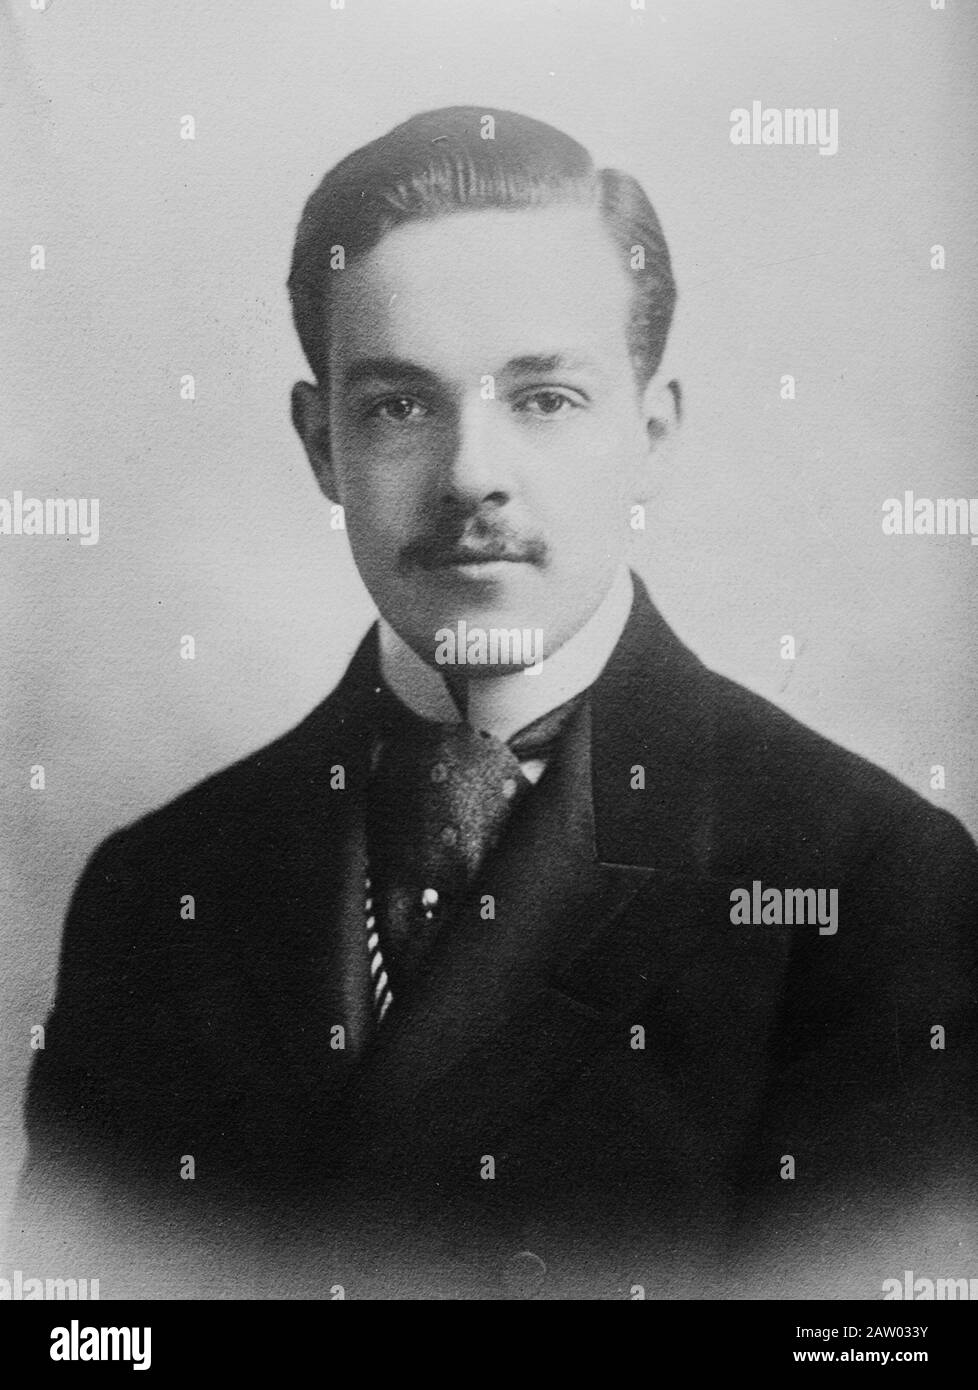 Manuel II of Portugal who reigned as the last King of Portugal from 1908-1910 Stock Photo